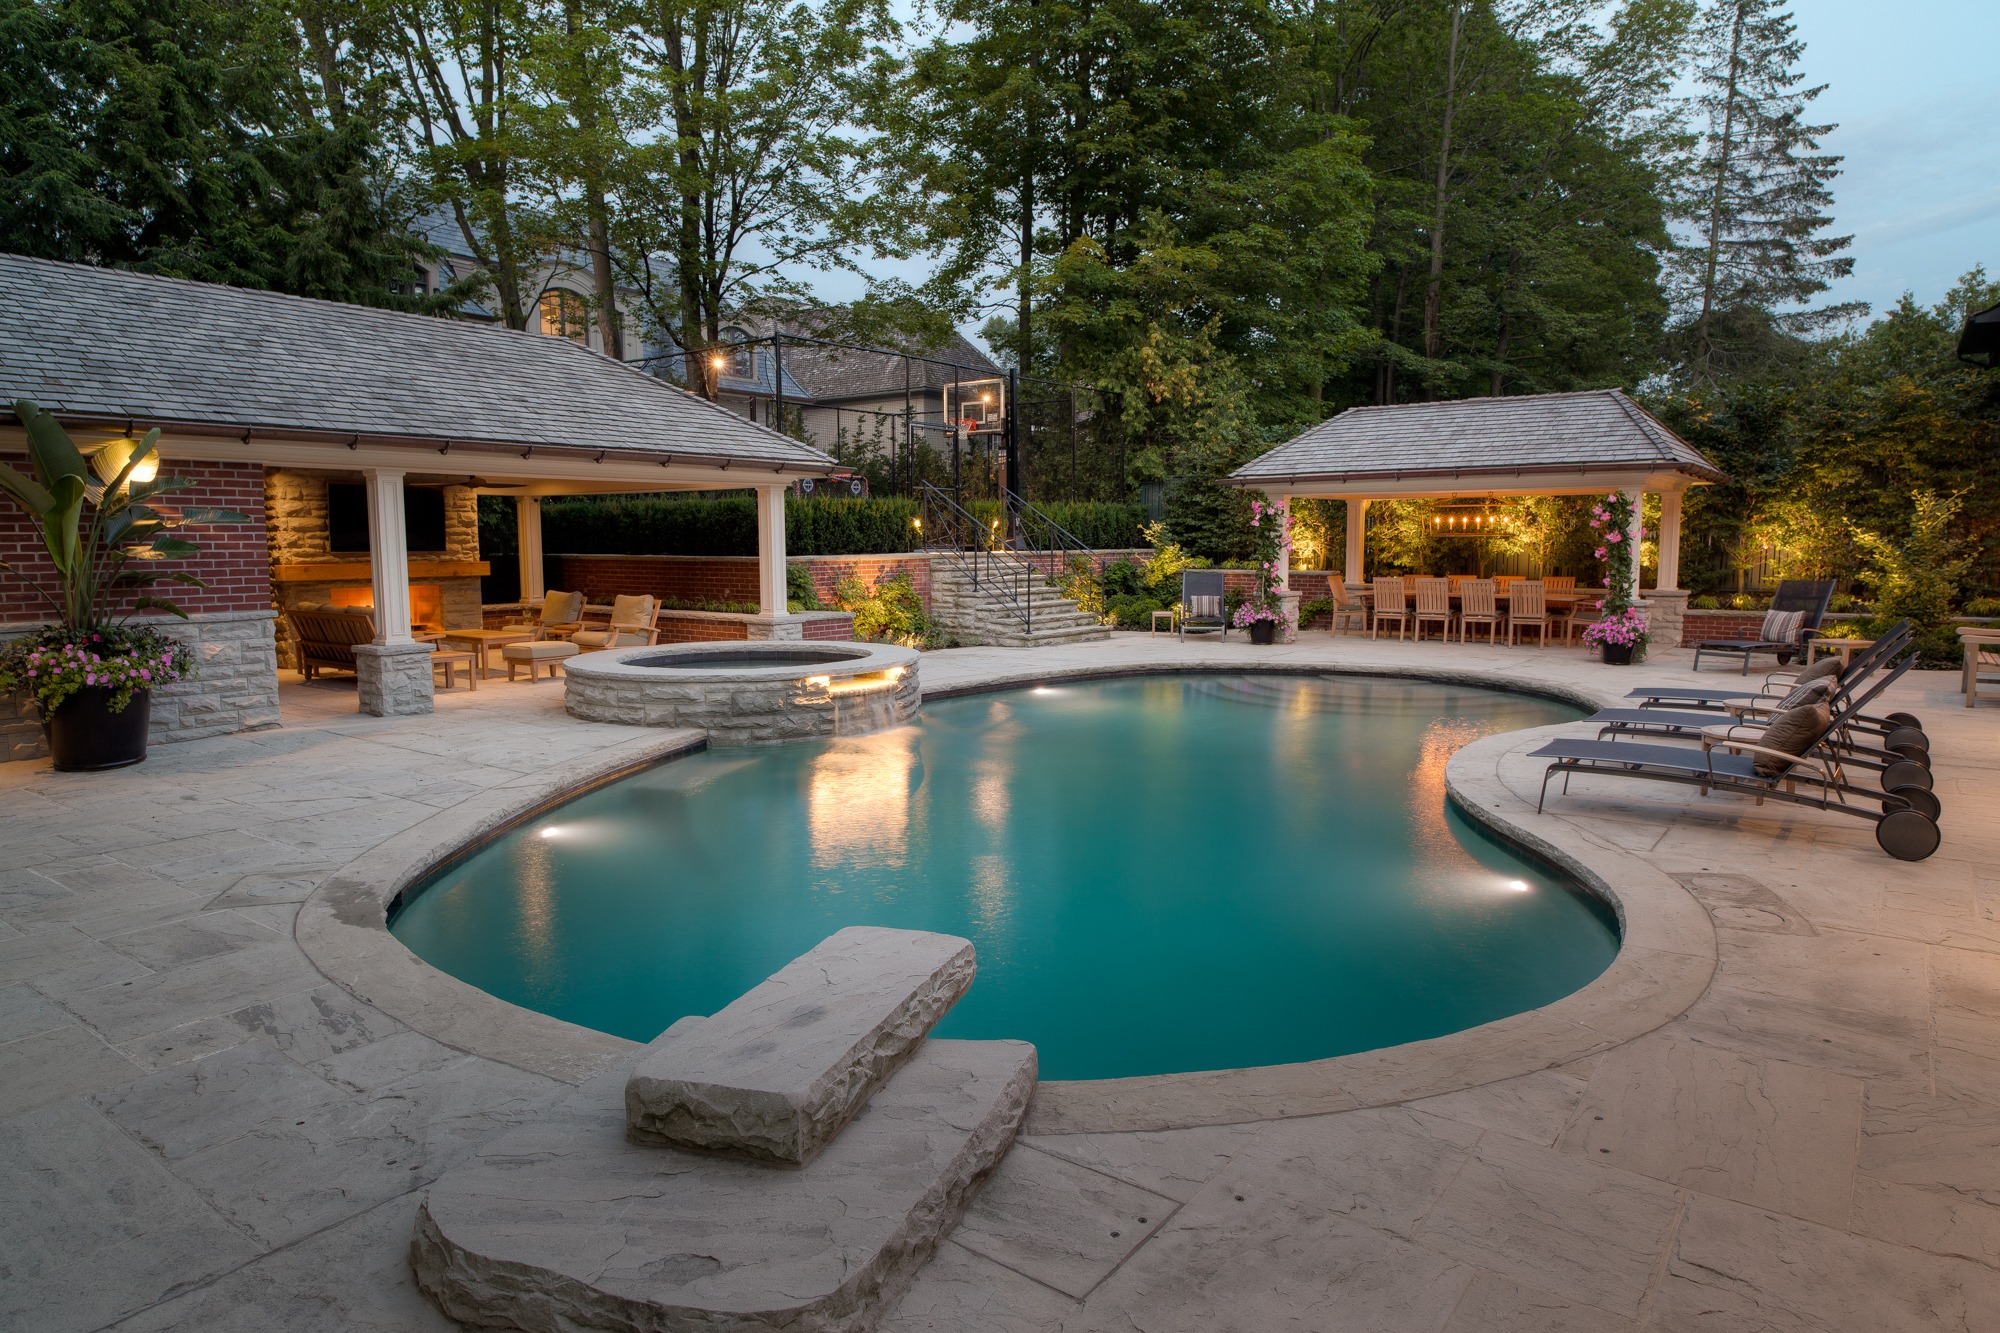 An elegant backyard with a curved swimming pool, surrounded by stone patios, loungers, and covered areas with lighting, trees, and a warm ambiance.